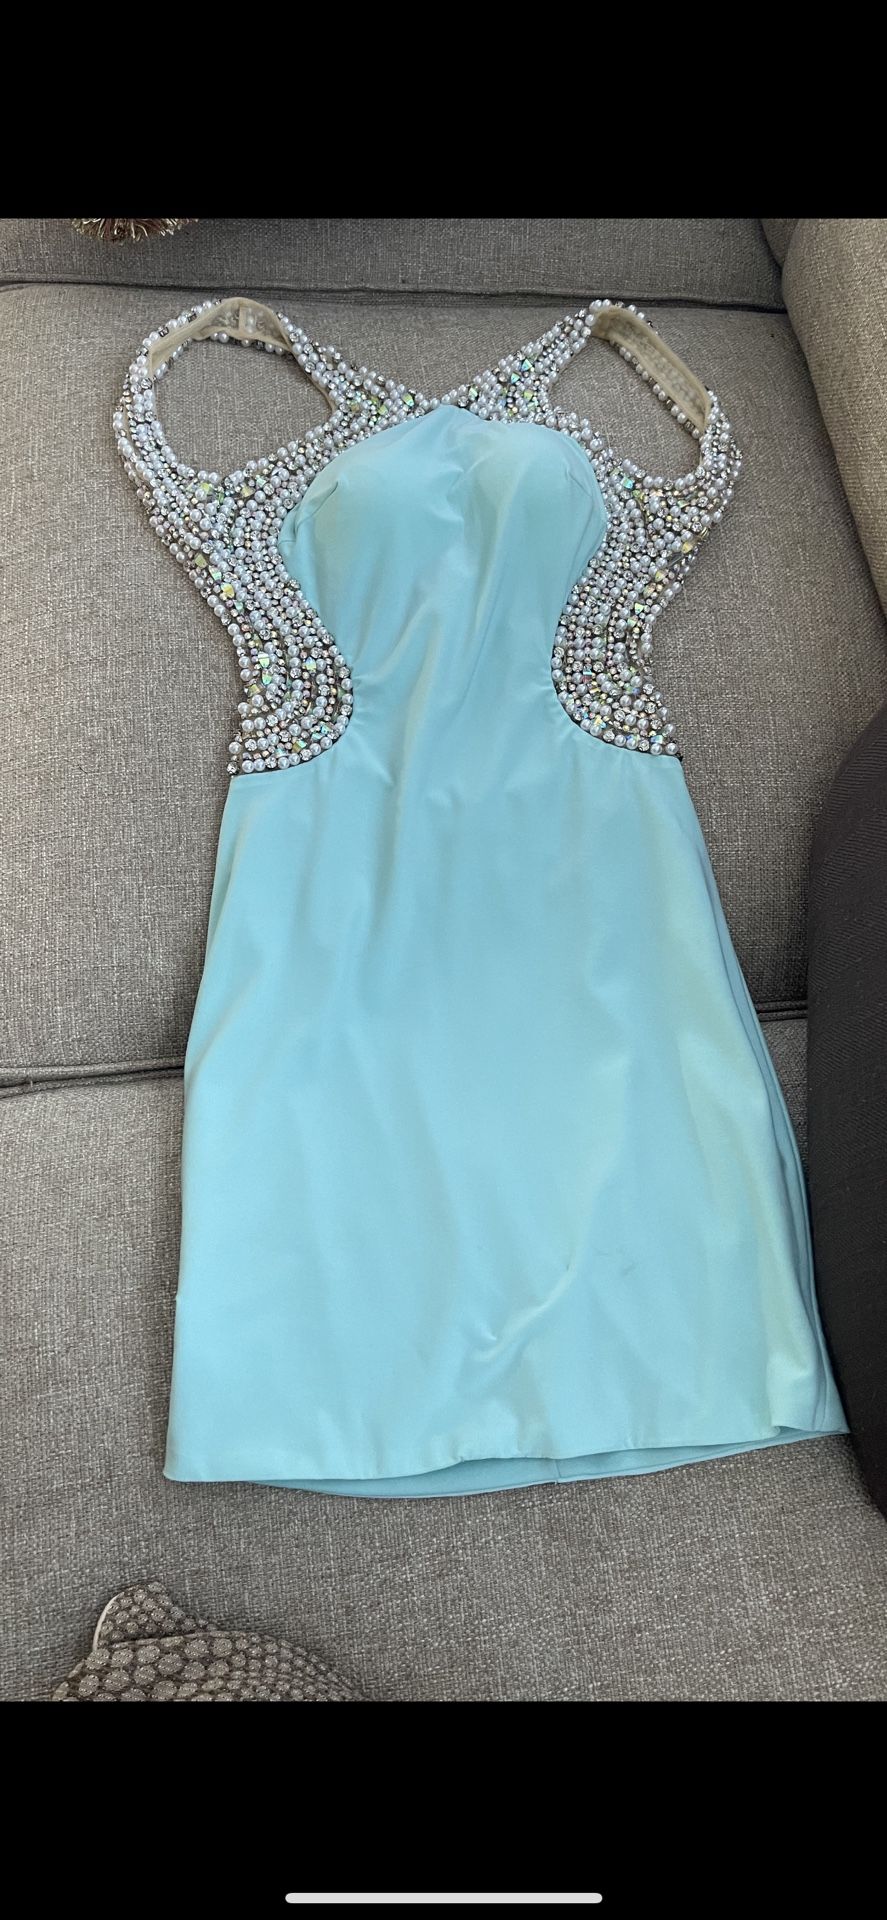 Jovani Party Formal Dress Size 2 Or S